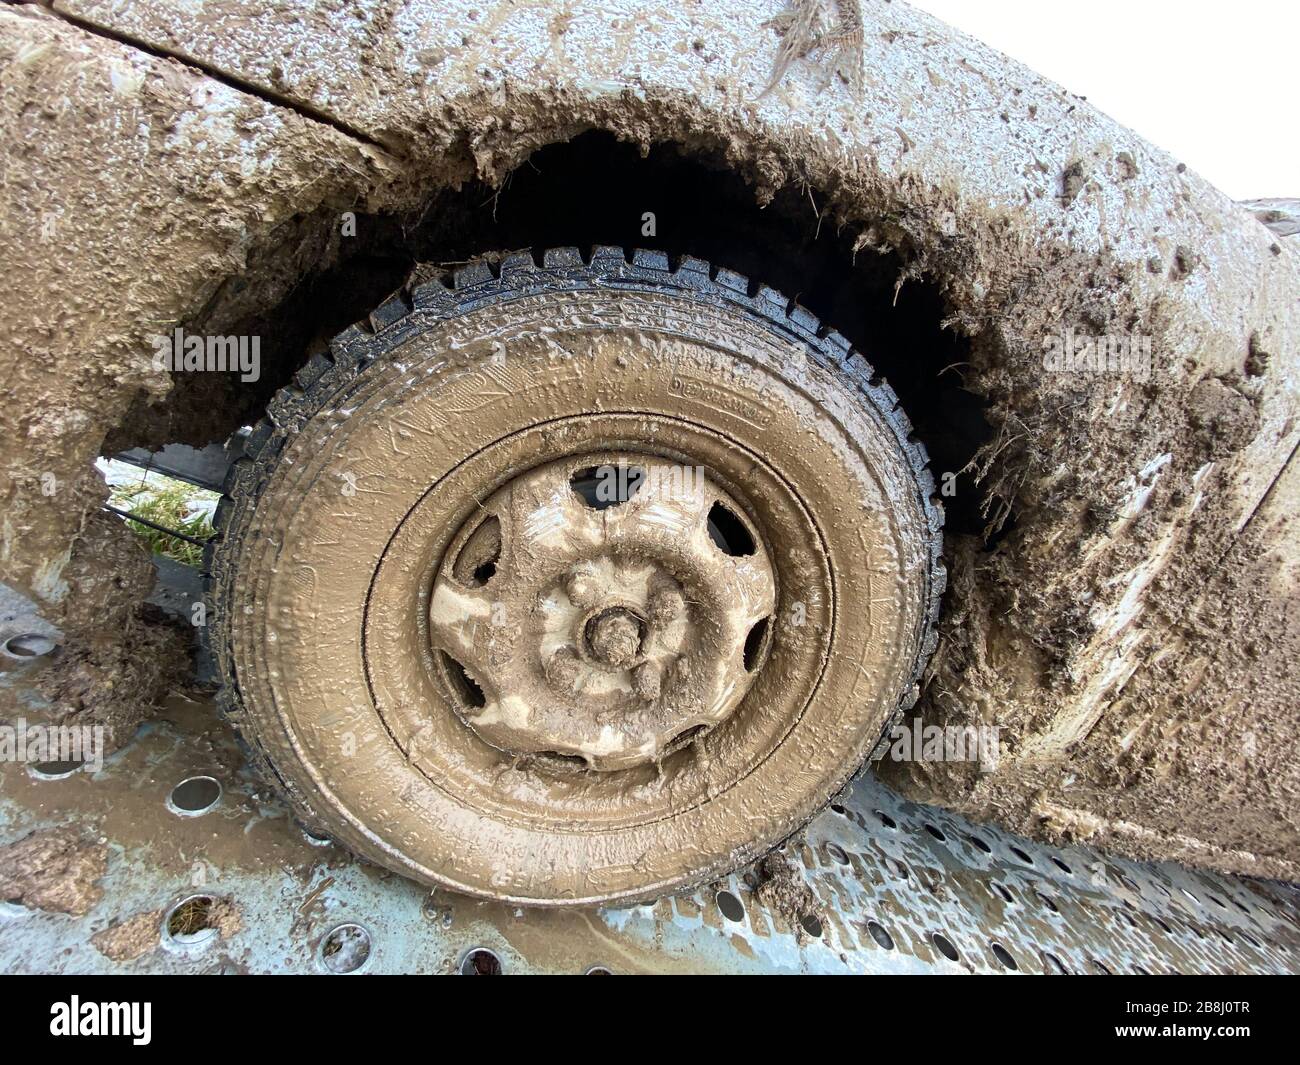 The detail of the car completely dirty by mud after the drag race on a field during winter. It needs complete cleaning of the exterior and interior. Stock Photo